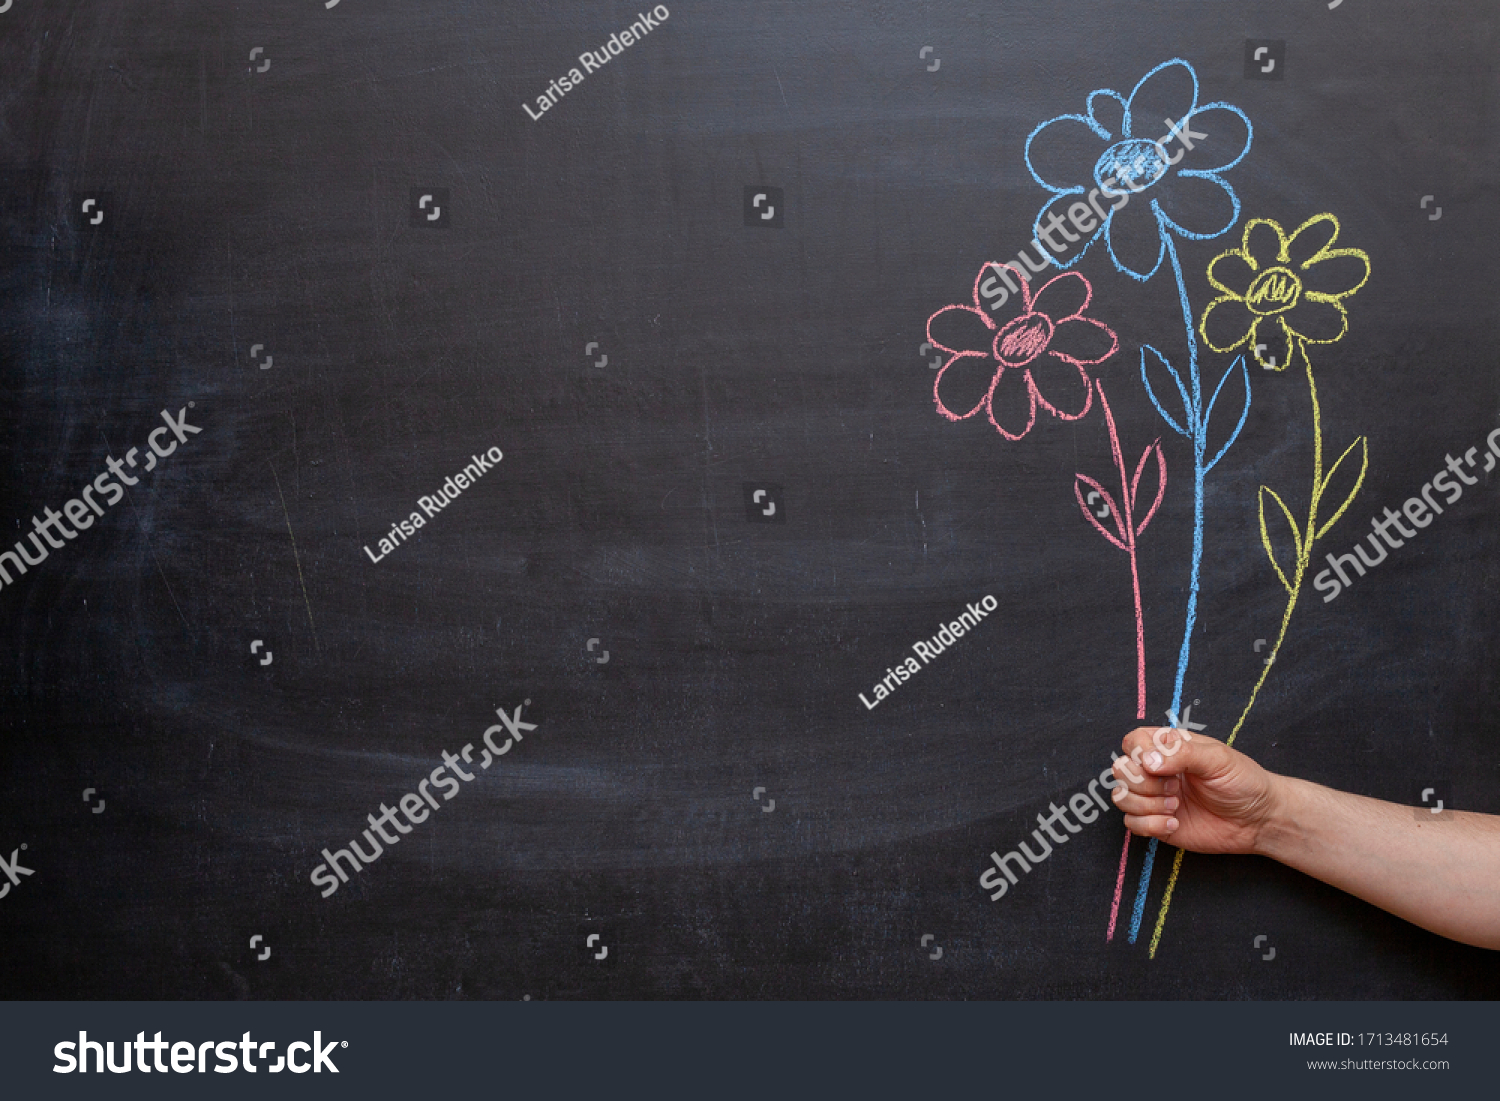 A man's hand holds flowers drawn on a chalkboard in his hand. #1713481654